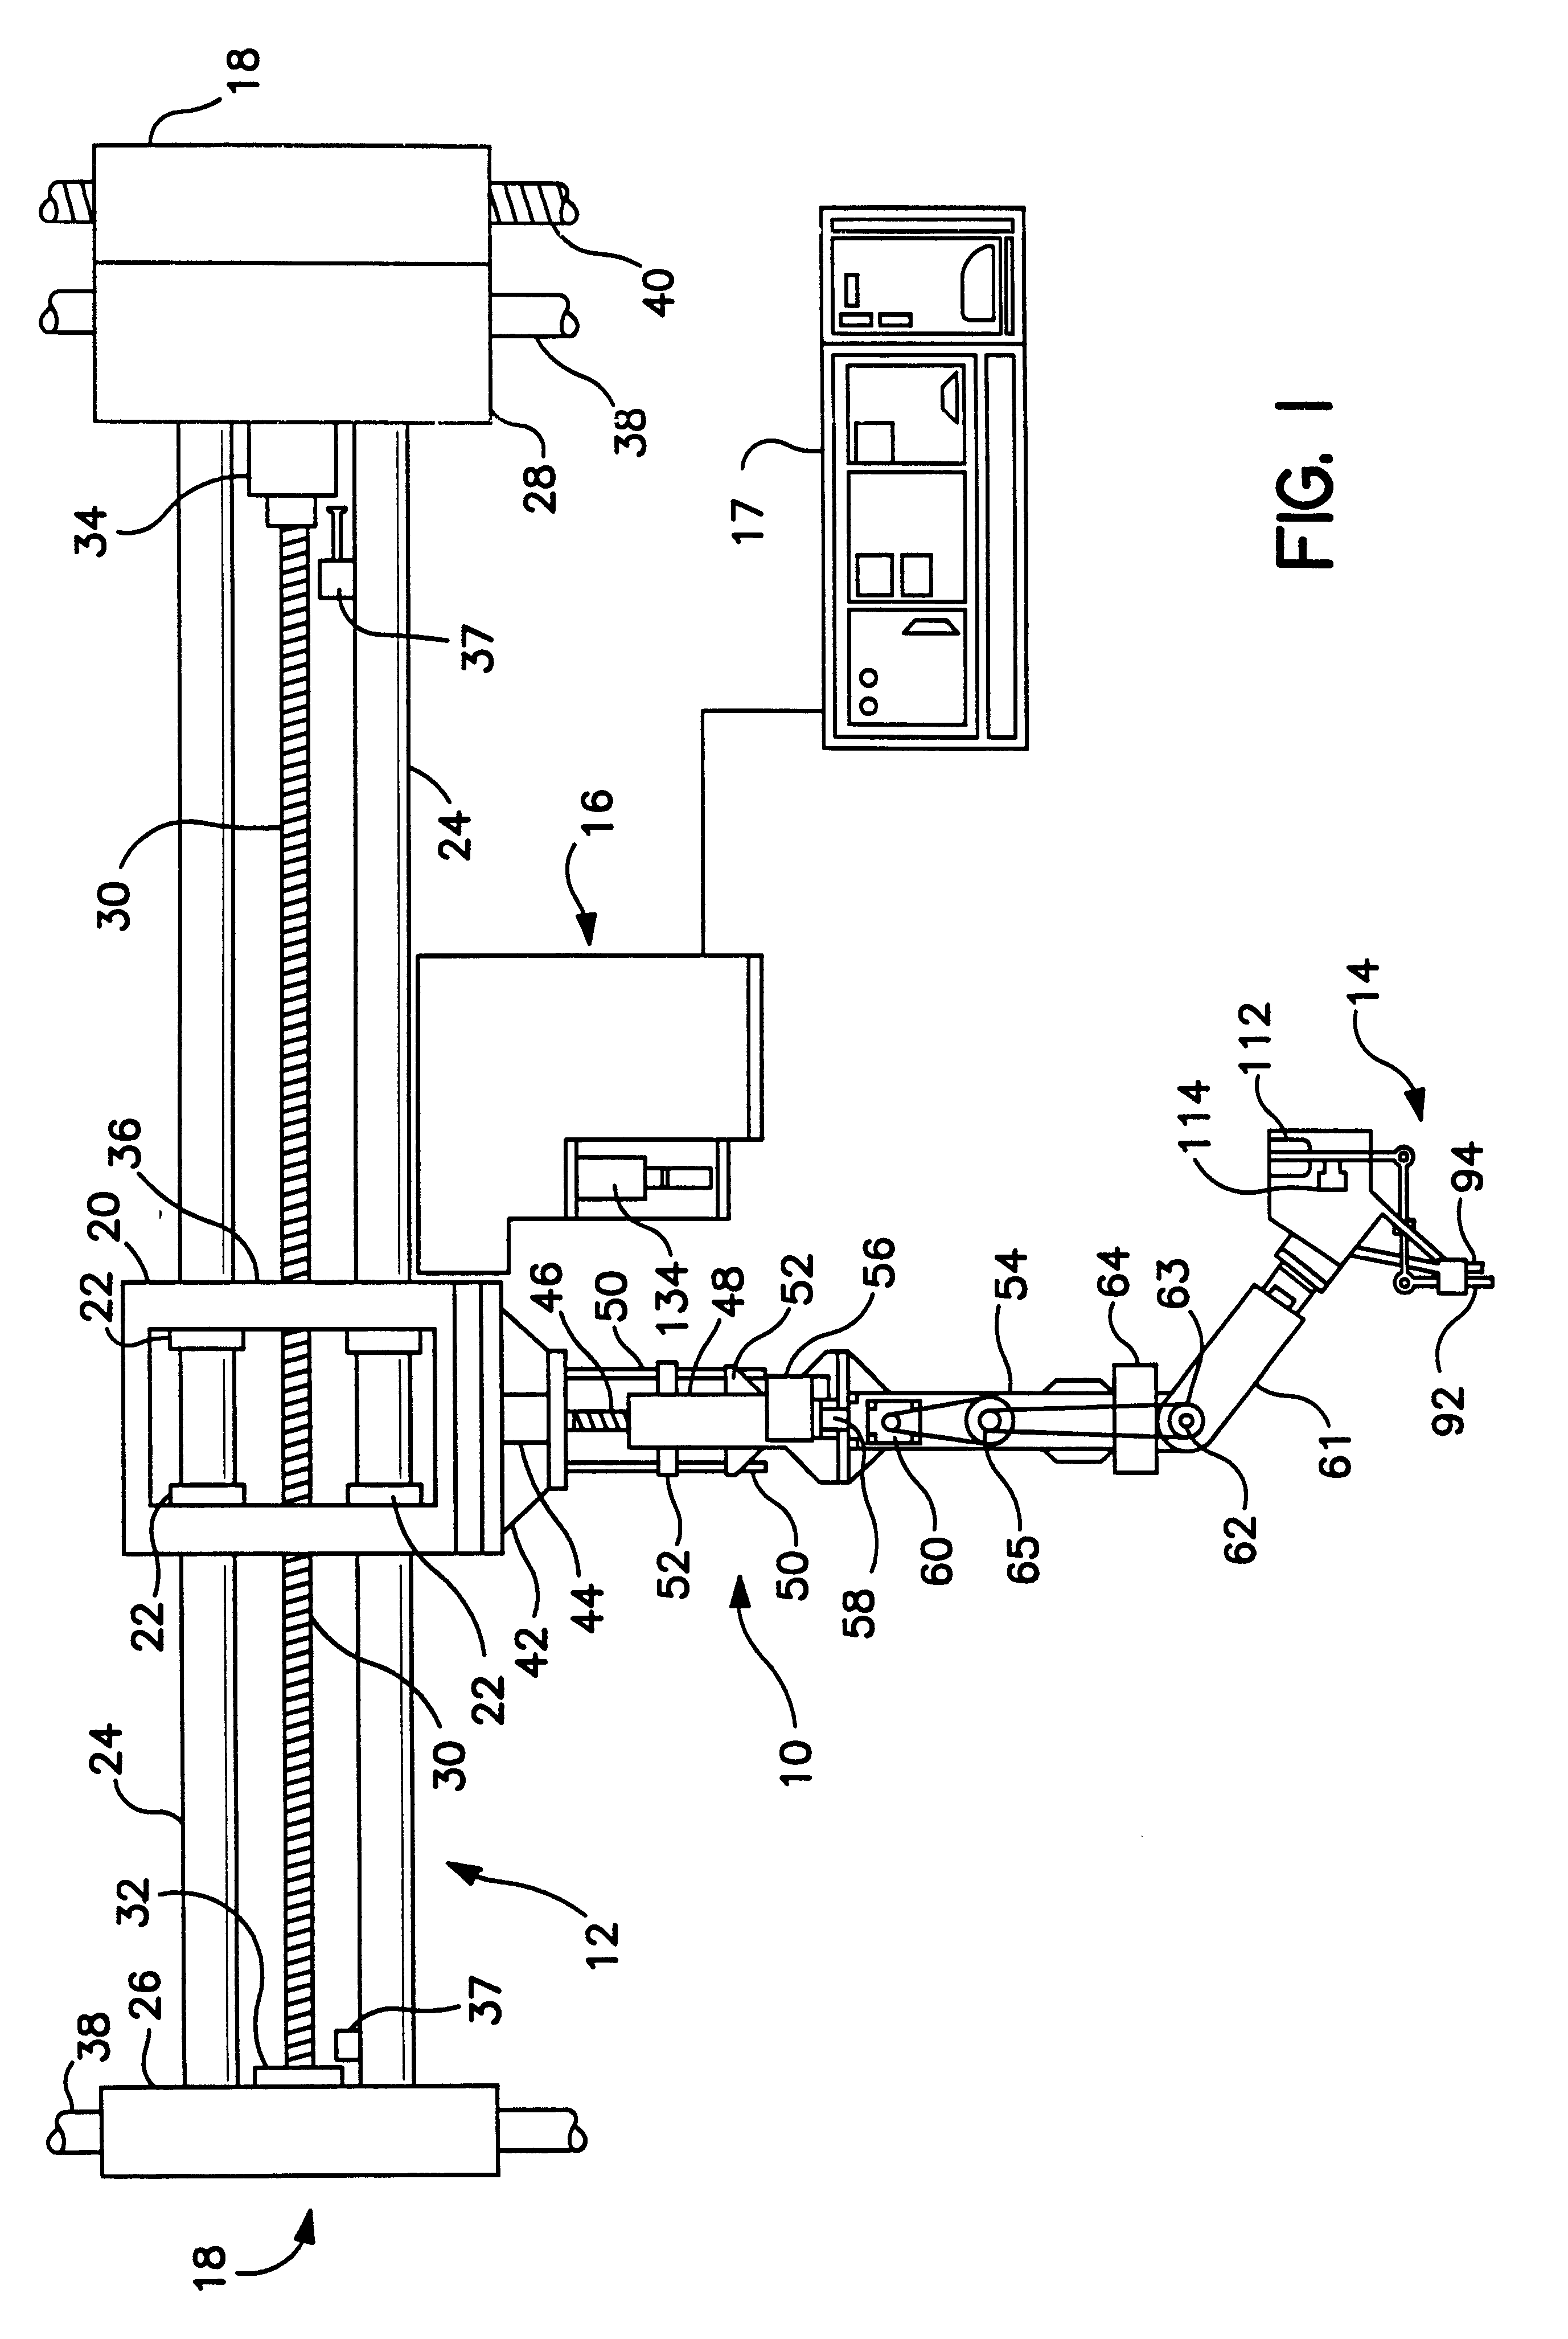 Method and apparatus for detecting very small breast anomalies